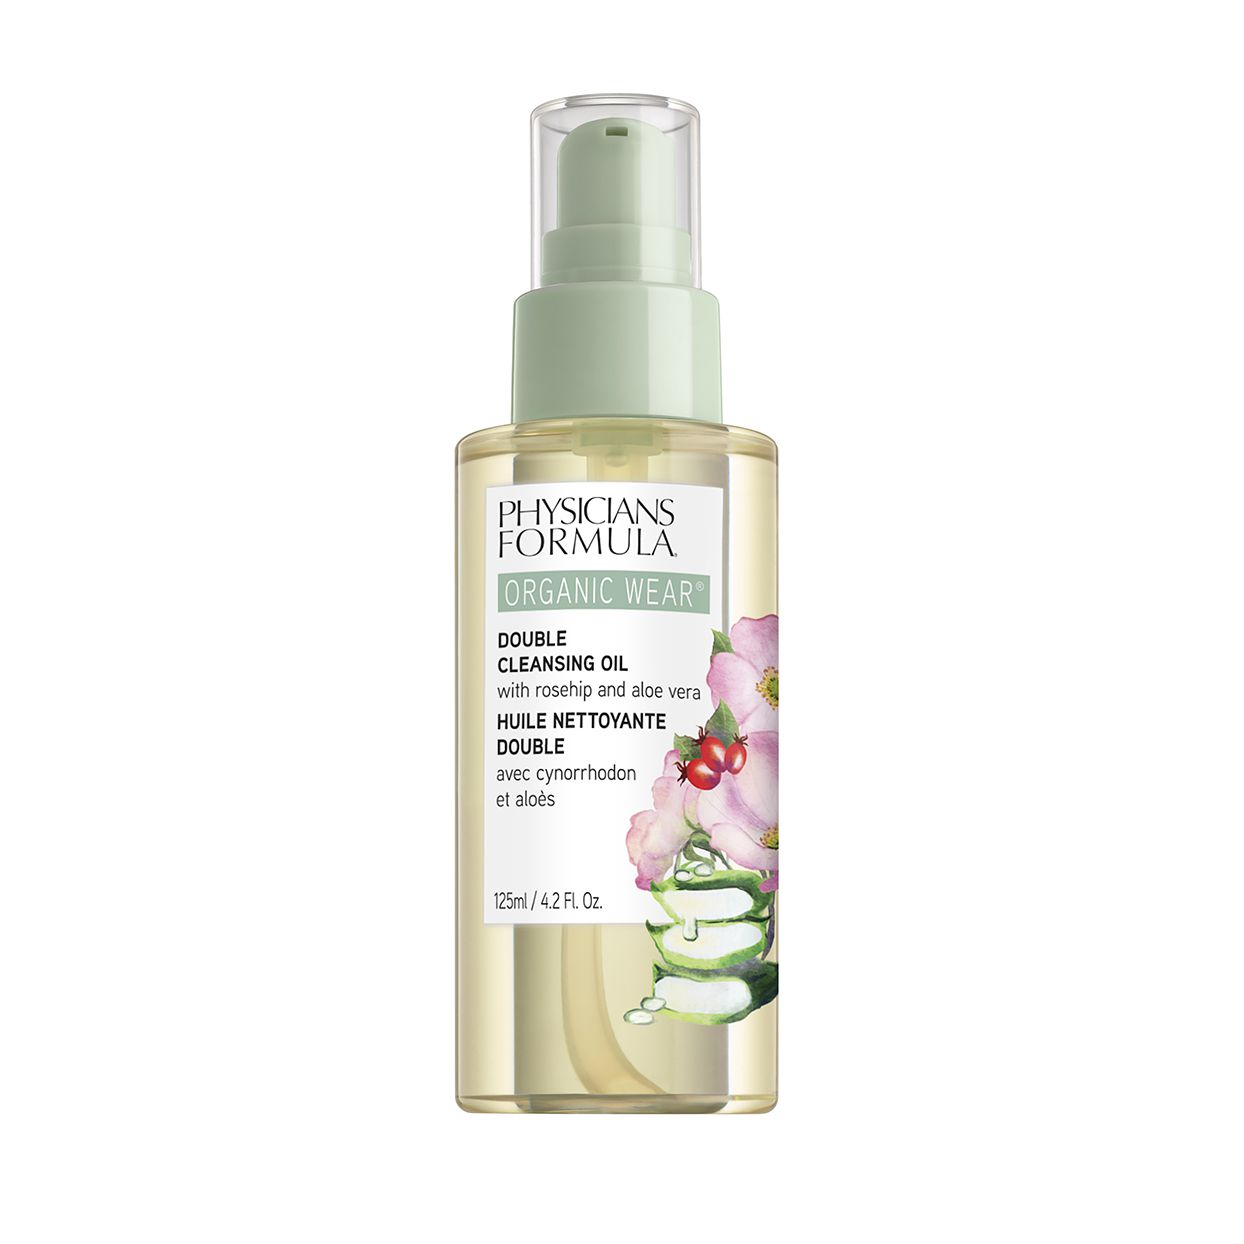 Physicians Formula Organic Wear Double Cleansing Oil